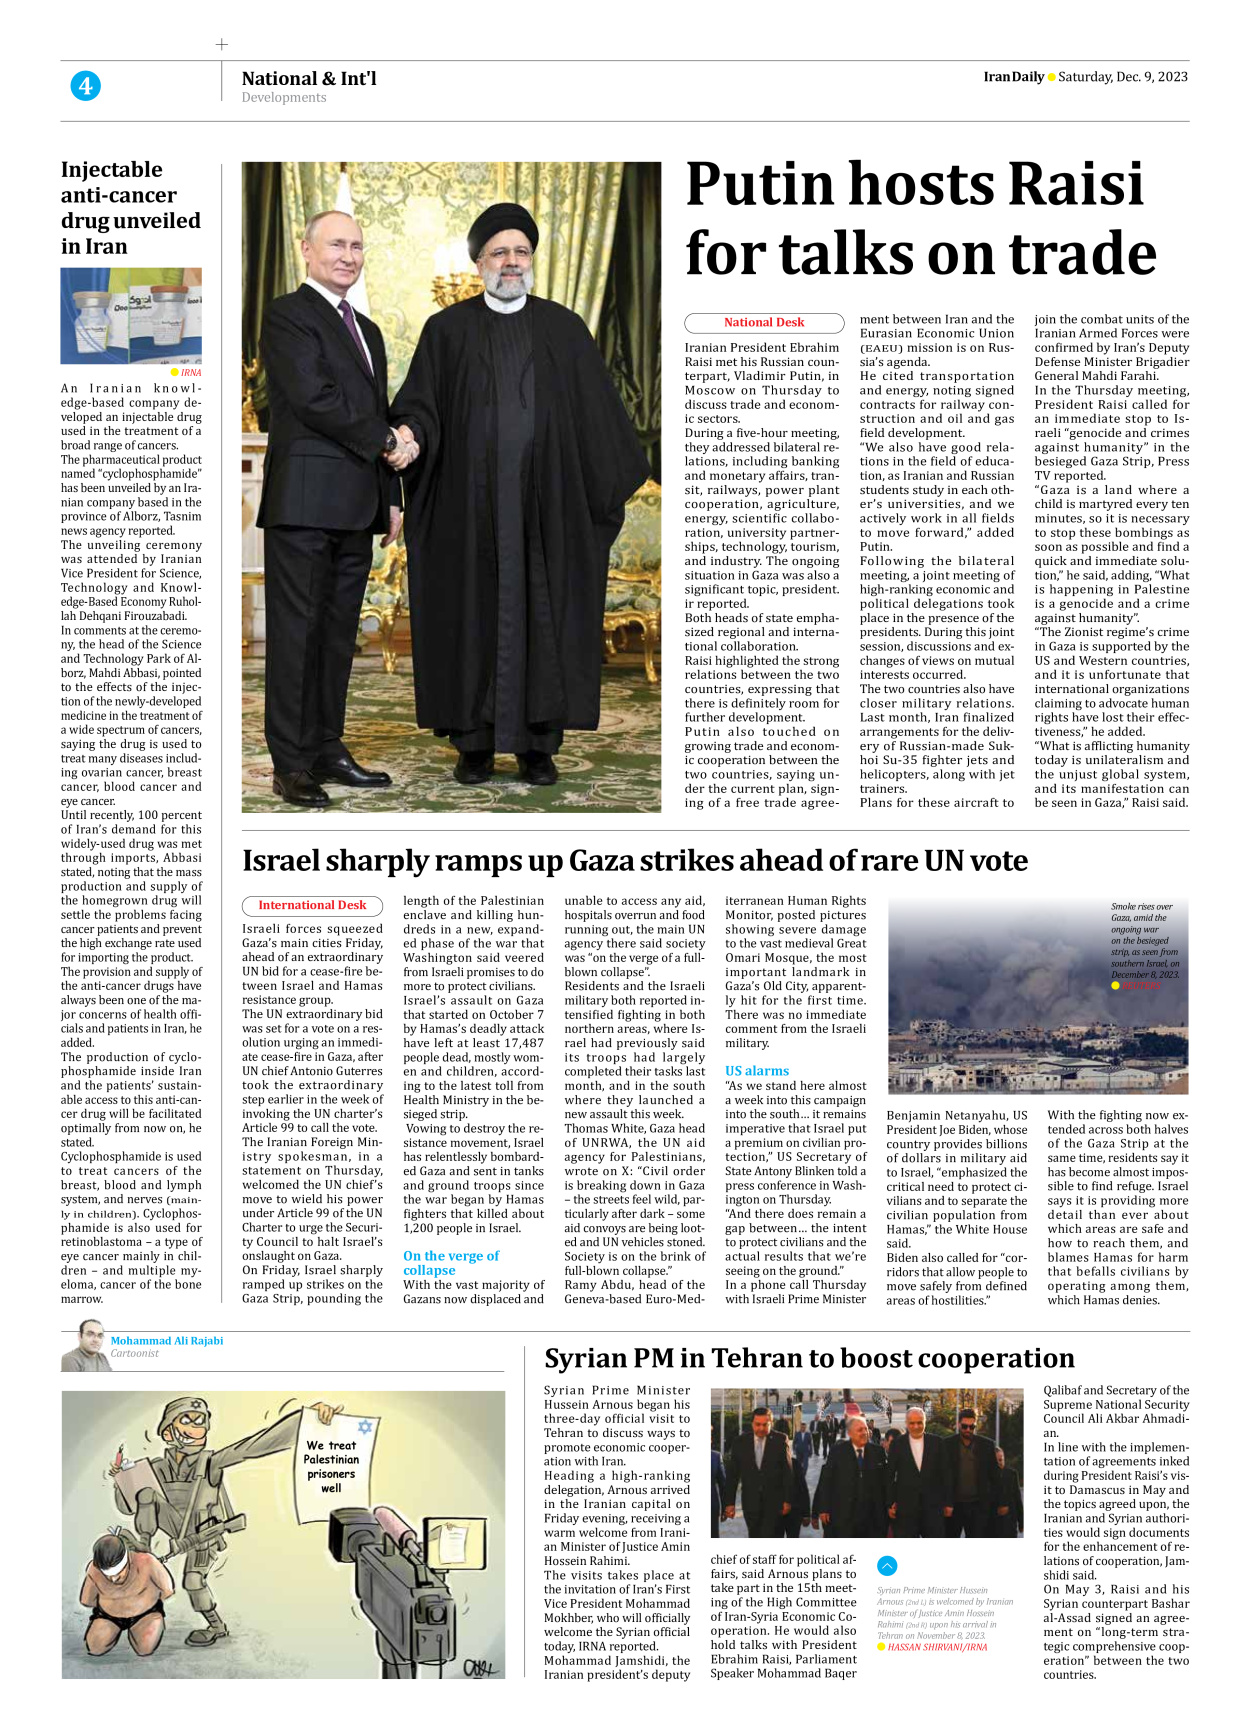 Iran Daily - Number Seven Thousand Four Hundred and Fifty Five - 09 December 2023 - Page 4